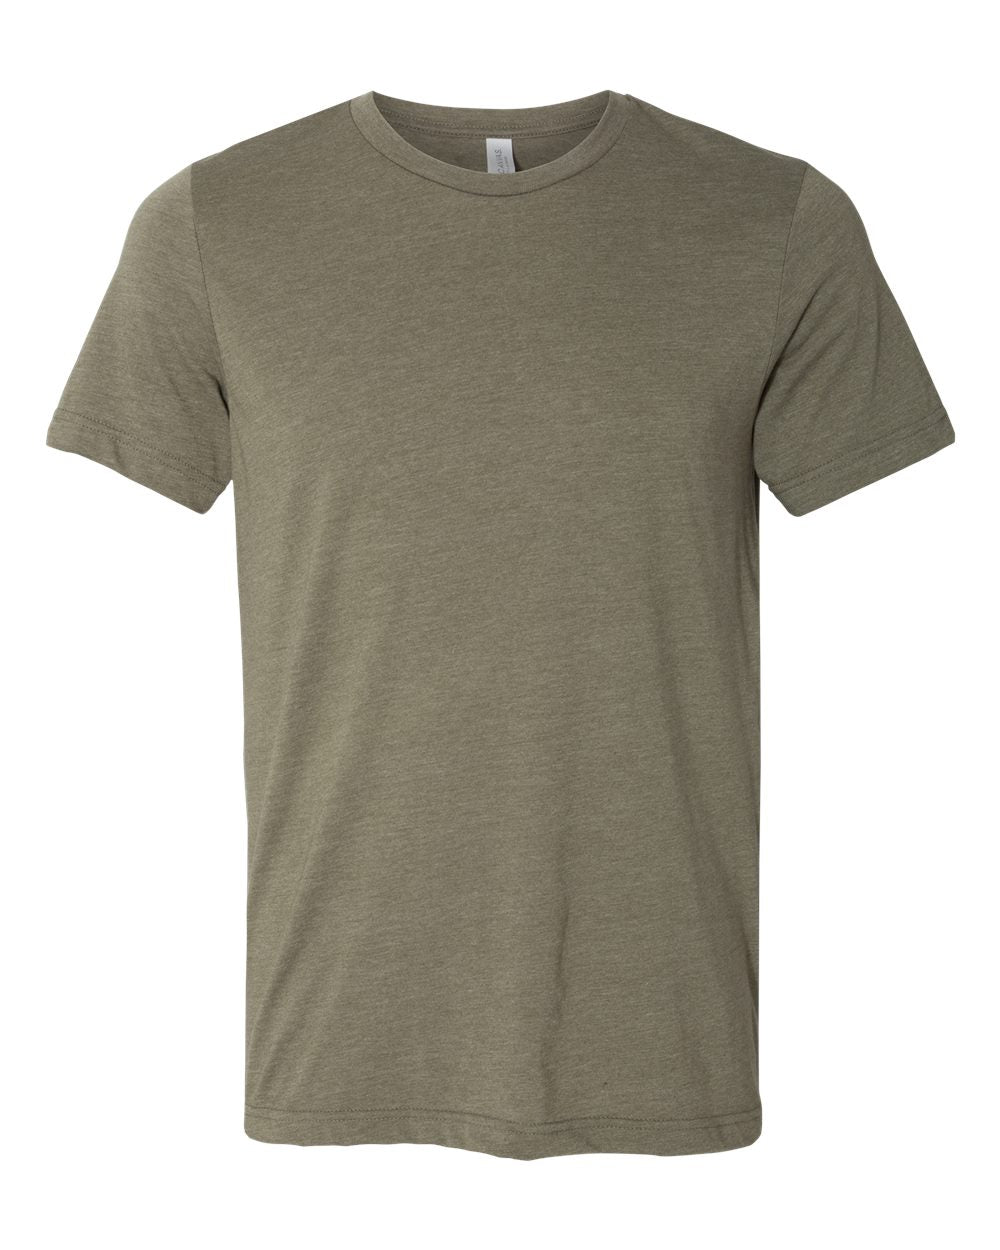 Bella + Canvas Triblend Tee (3413) in Olive Triblend